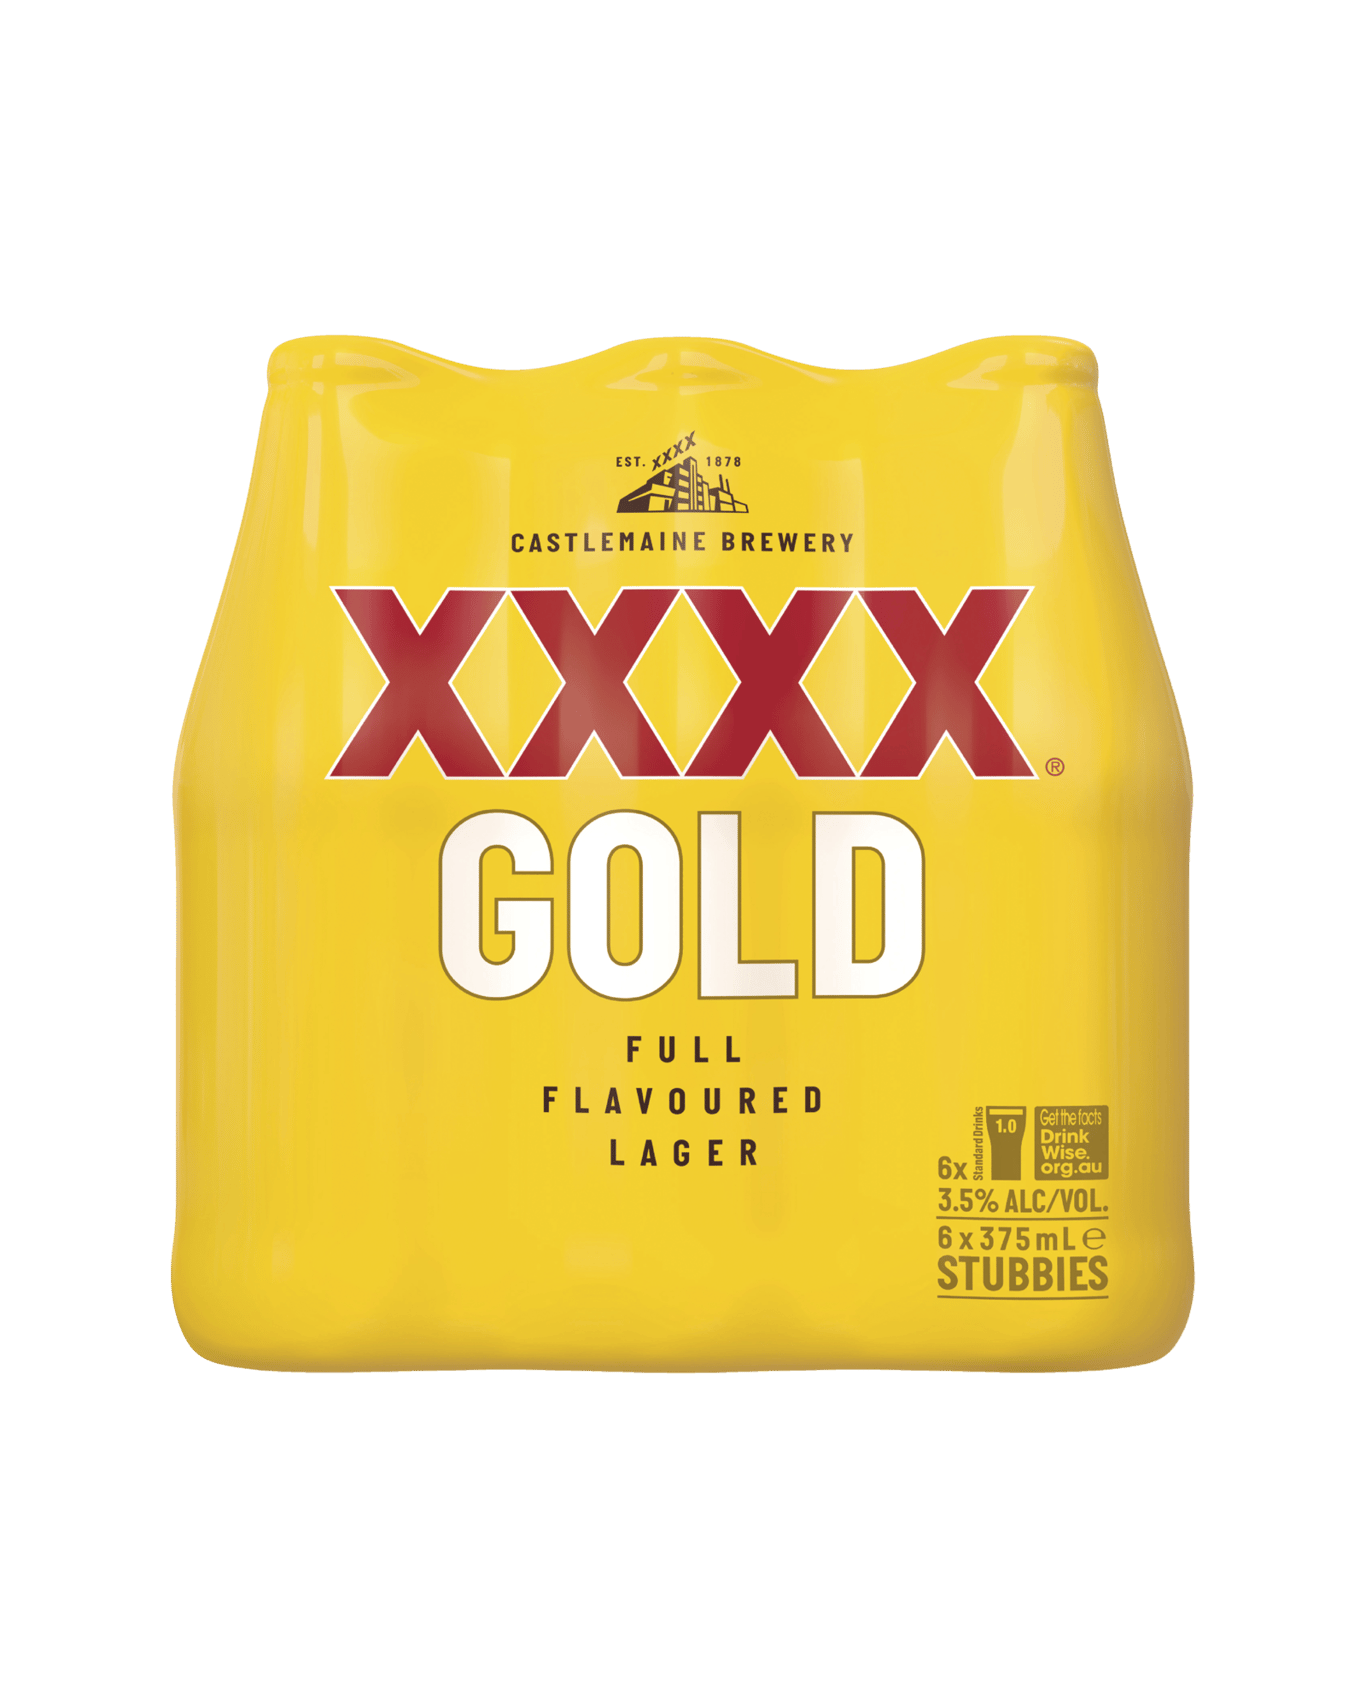 Buy Xxxx Gold Lager Bottle 375ml Online Lowest Price Guarantee Best Deals Same Day Delivery